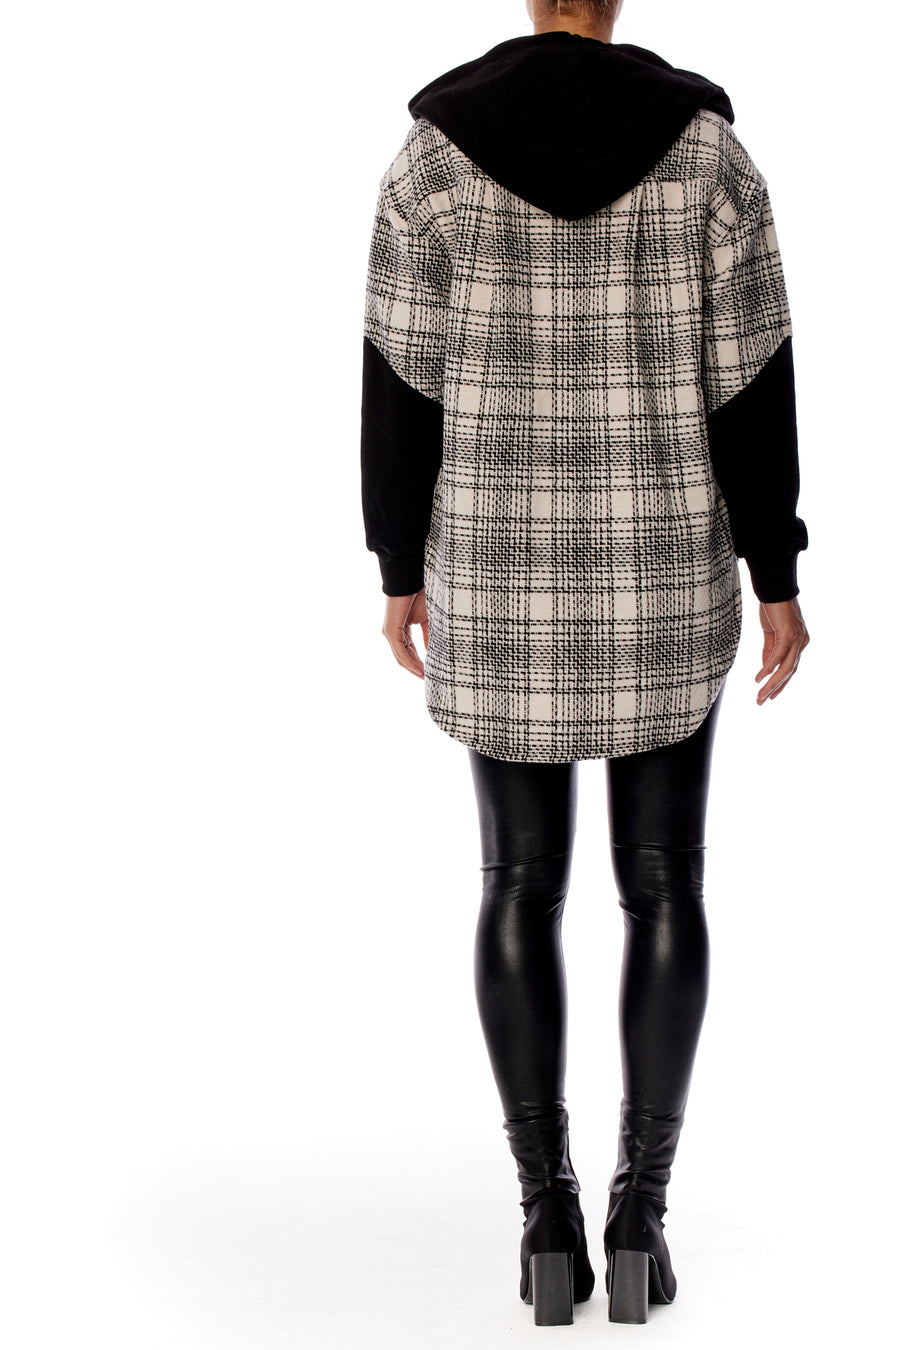 Cozy button up, black and white plaid hoodie with shirttail hem, contrasting sleeve & front pockets